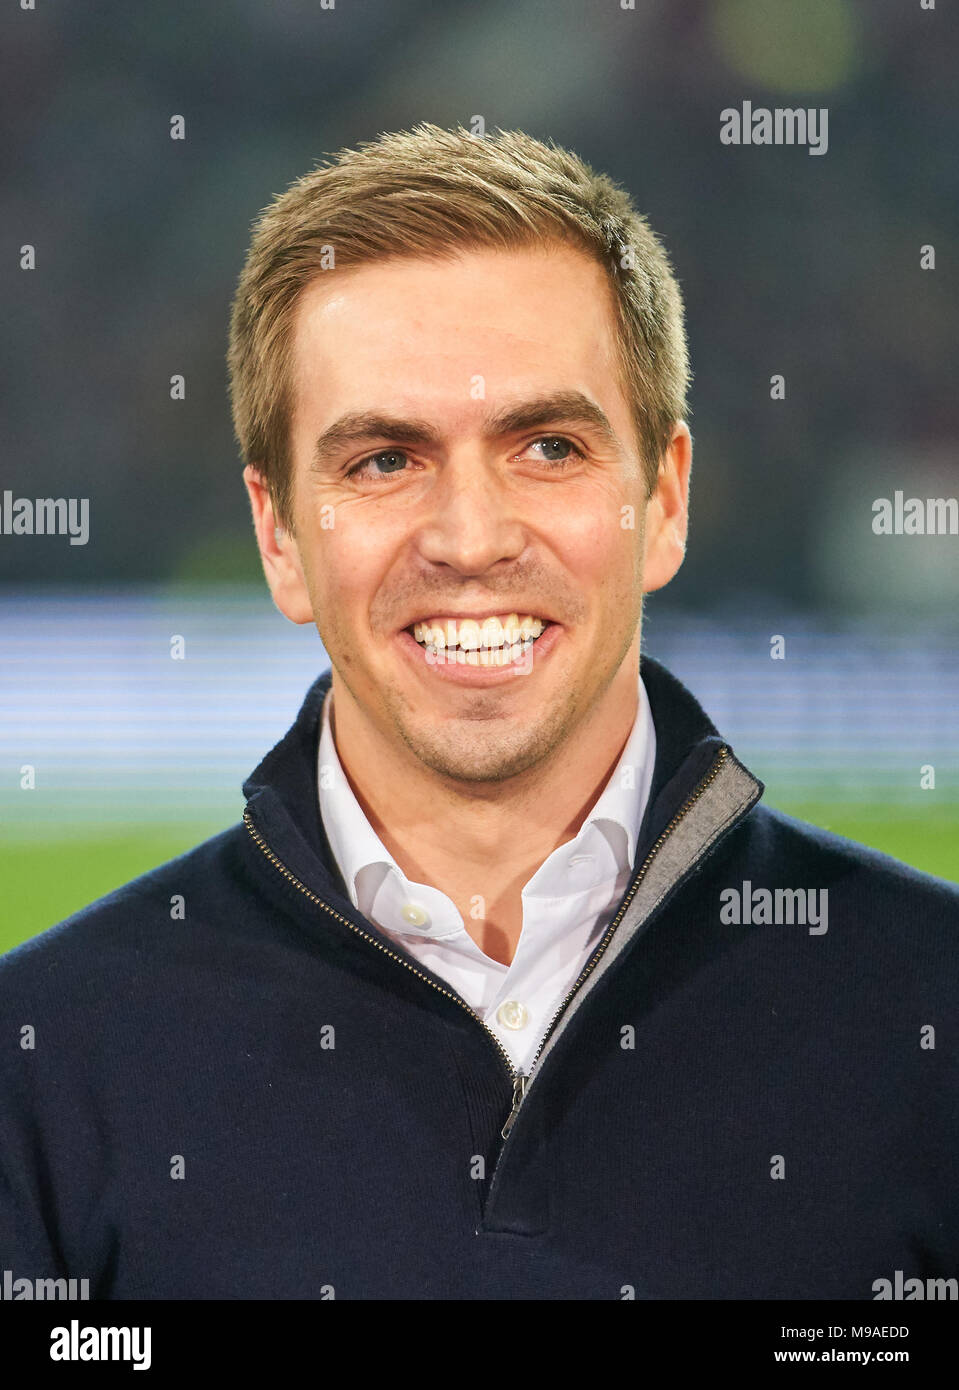 Dusseldorf, Germany. 24th March, 2018. DFB-ESP Football Test, Dusseldorf, March 23, 2018  Philipp LAHM former player and DFB capitaen,  GERMANY - SPAIN 1-1 Soccer World Cup Russia Test match , Dusseldorf, March 23, 2018,  Season 2017/2018  © Peter Schatz / Alamy Live News Stock Photo